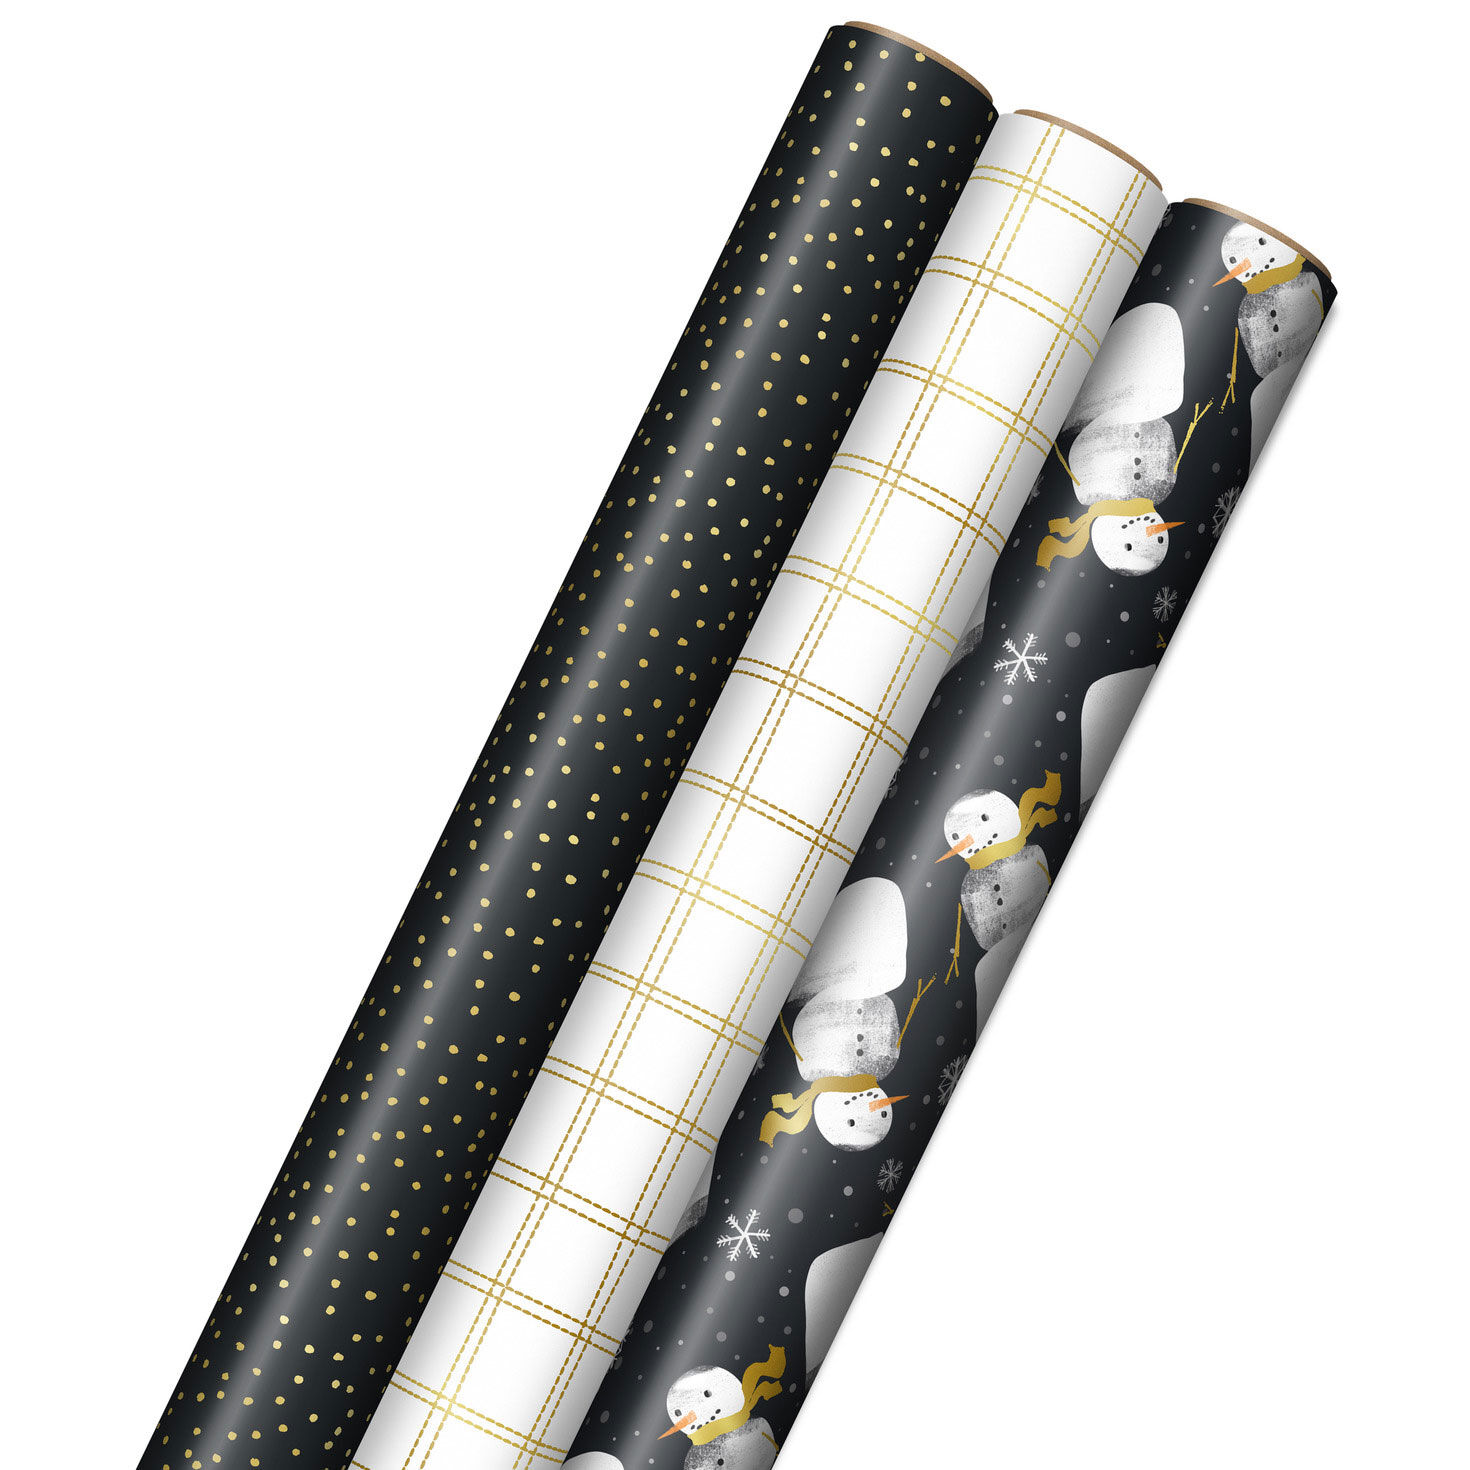 Modern Merry Multi-Pack Premium Wrapping Paper, Christmas, FSC Paper, 30,  120 sq ft, by Holiday Time